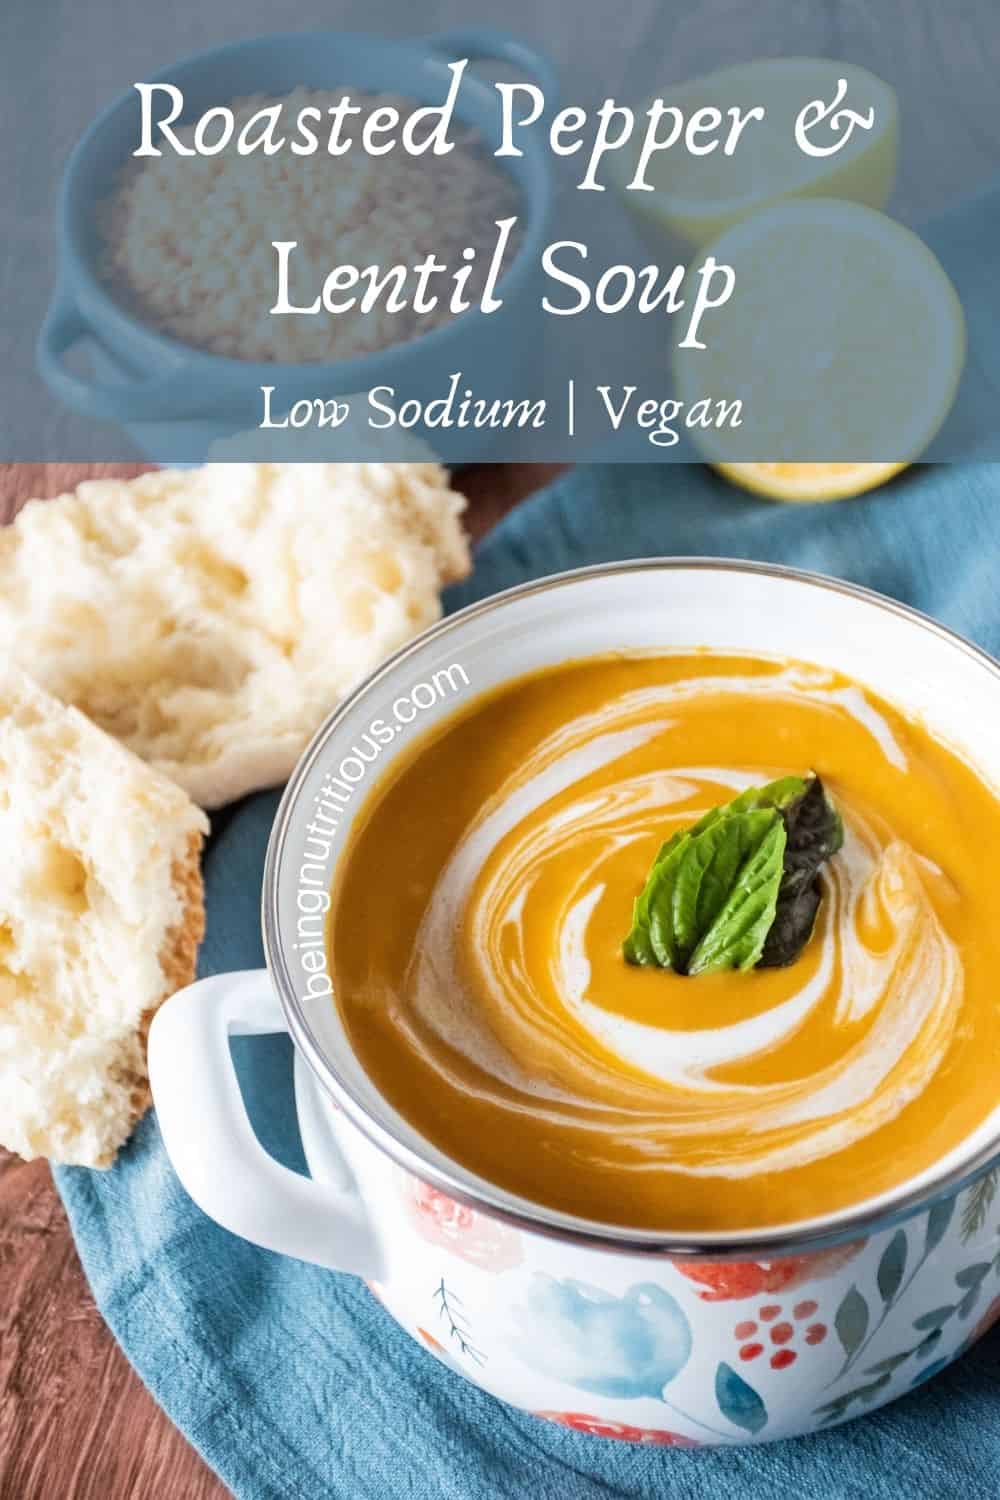 Small crock of creamy soup, garnished with basil leaves. Text overlay: Roasted Pepper and Lentil Soup, low sodium, vegan.